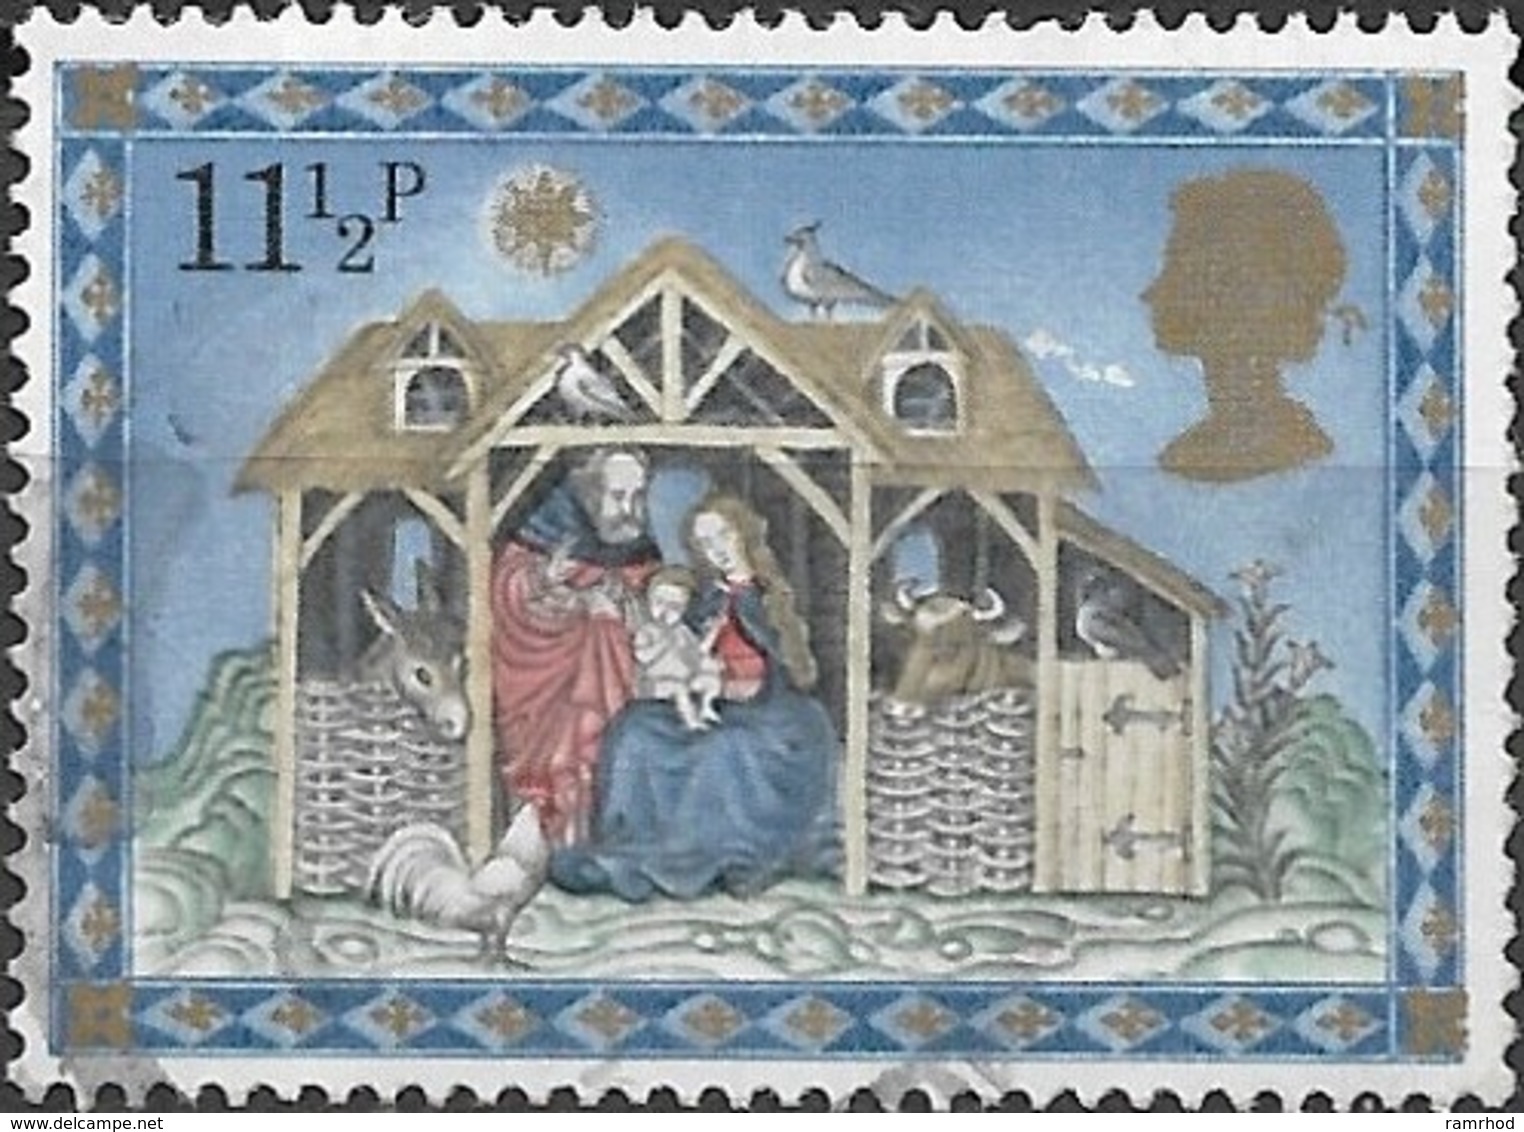 GREAT BRITAIN 1979 Christmas - 11 1/2 P - The Nativity FU - Used Stamps